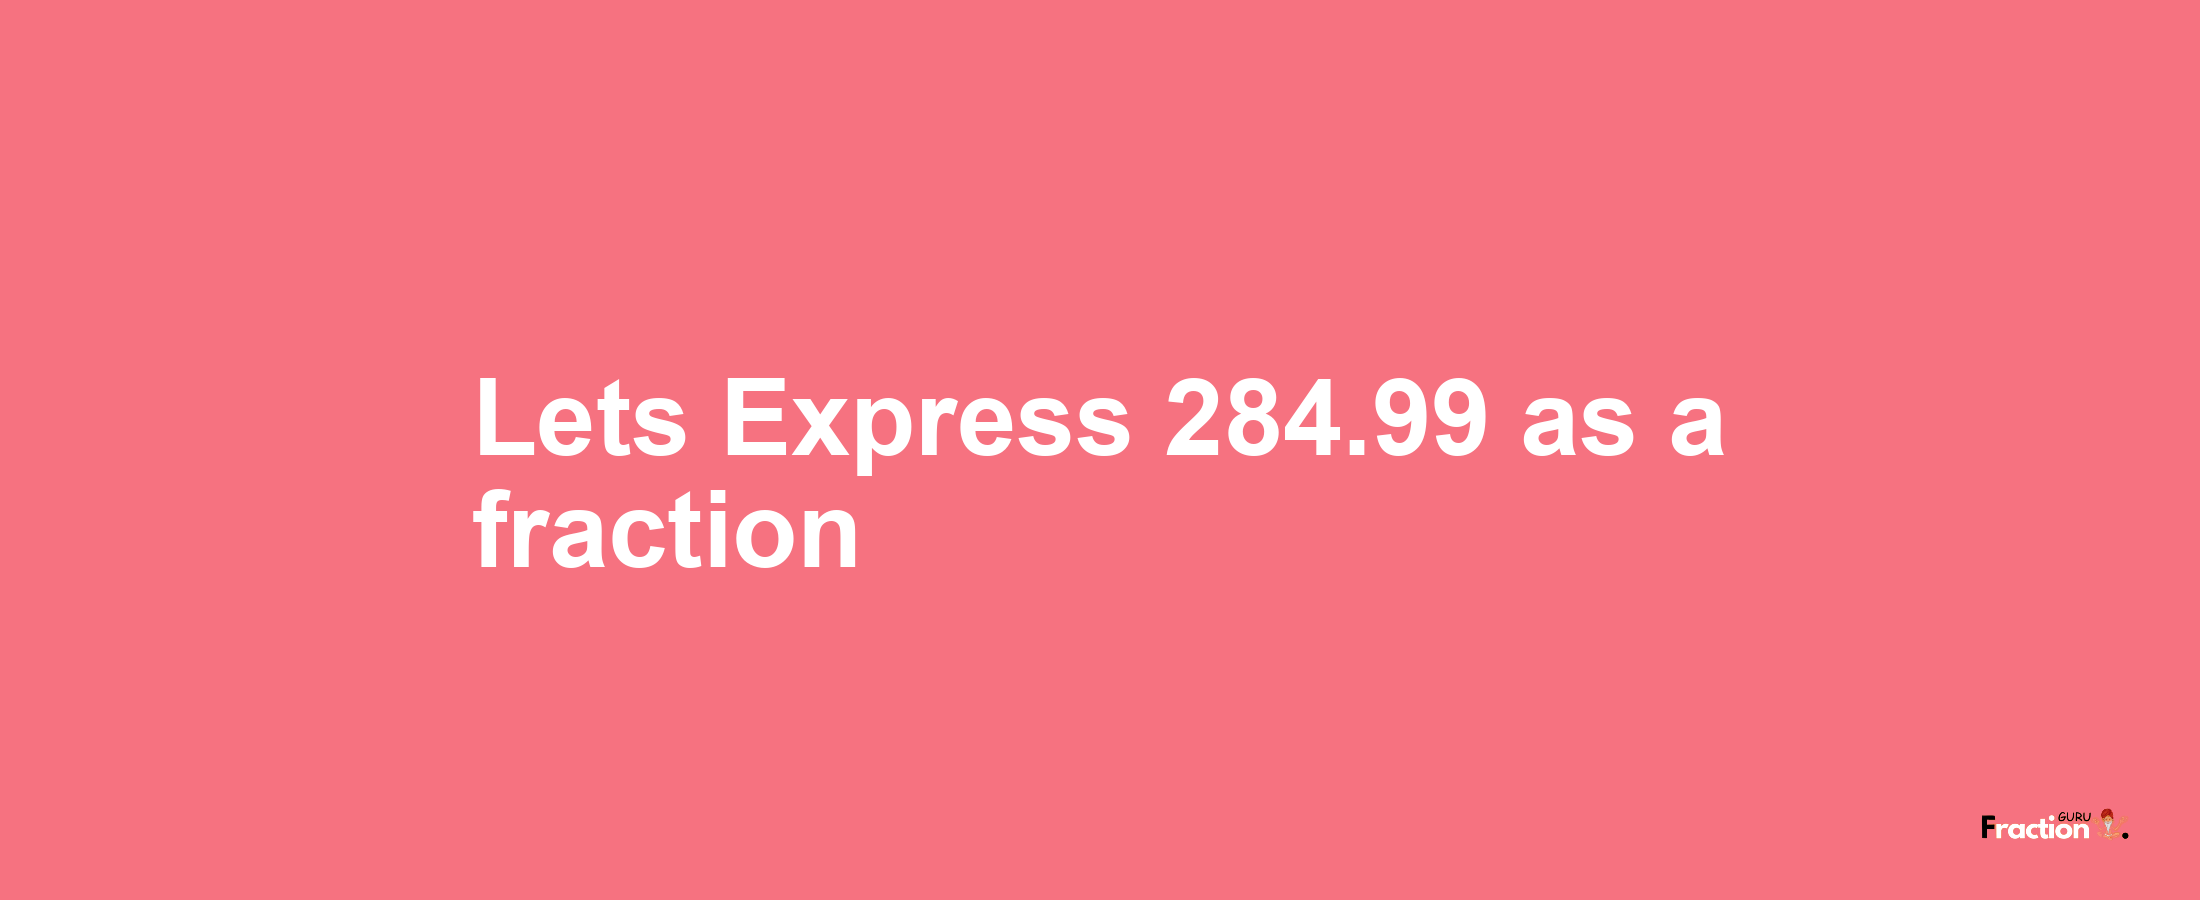 Lets Express 284.99 as afraction